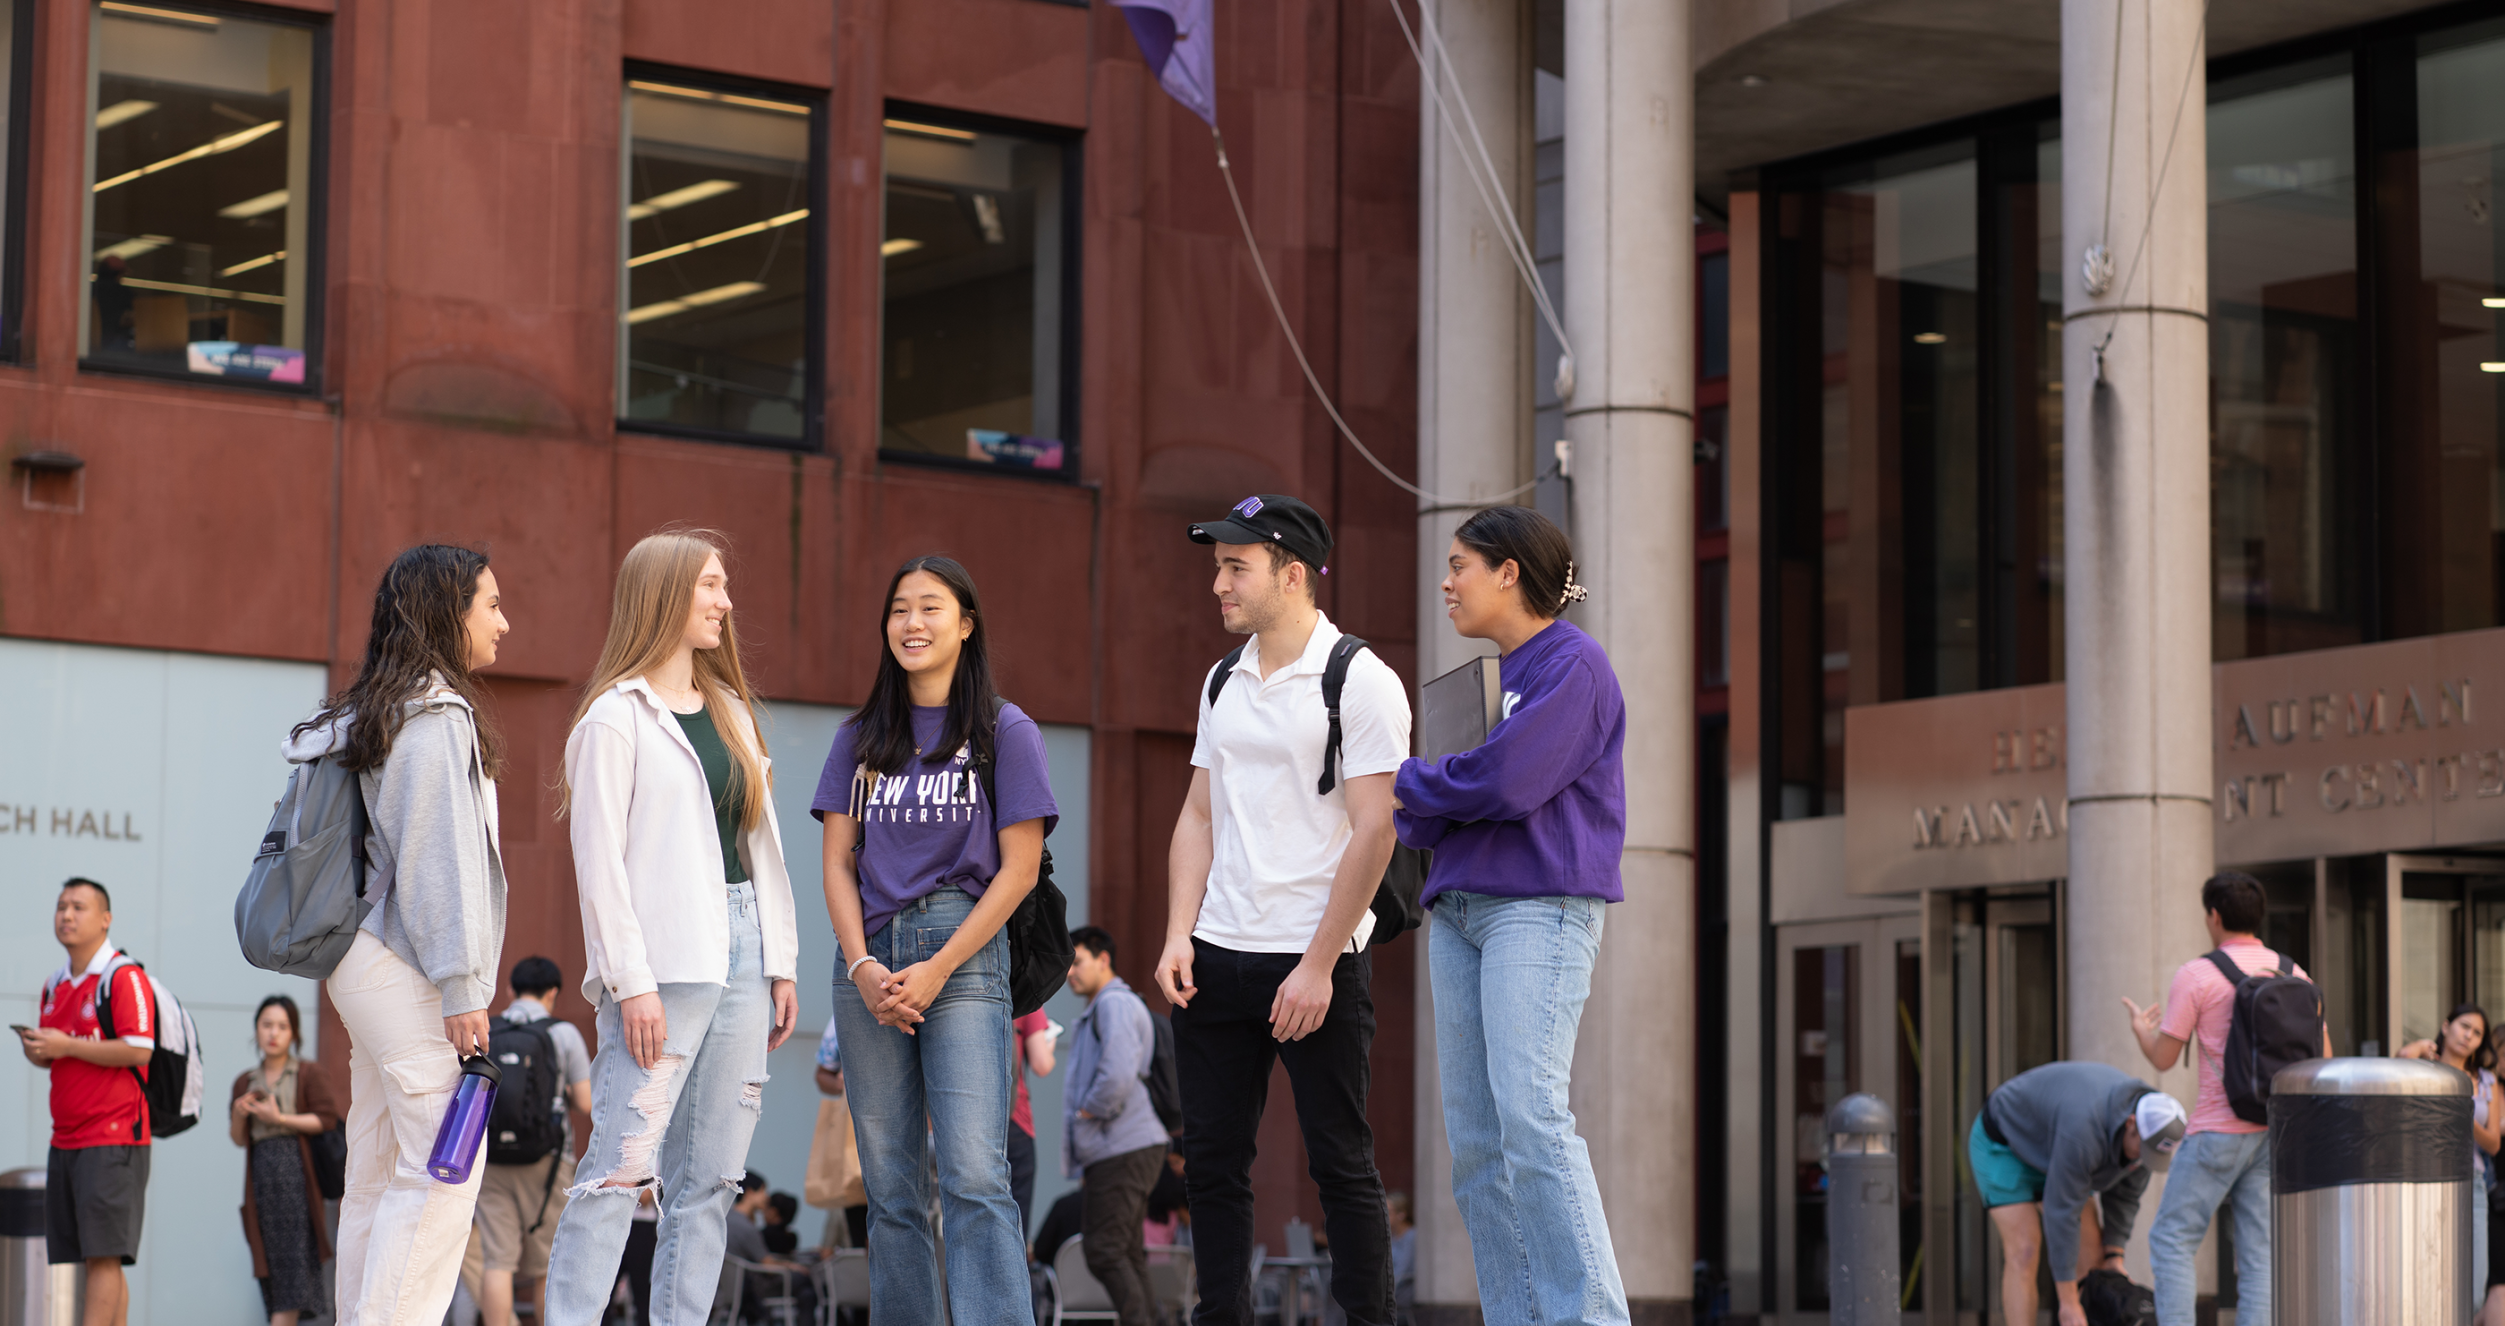 Stern students interact on Gould Plaza